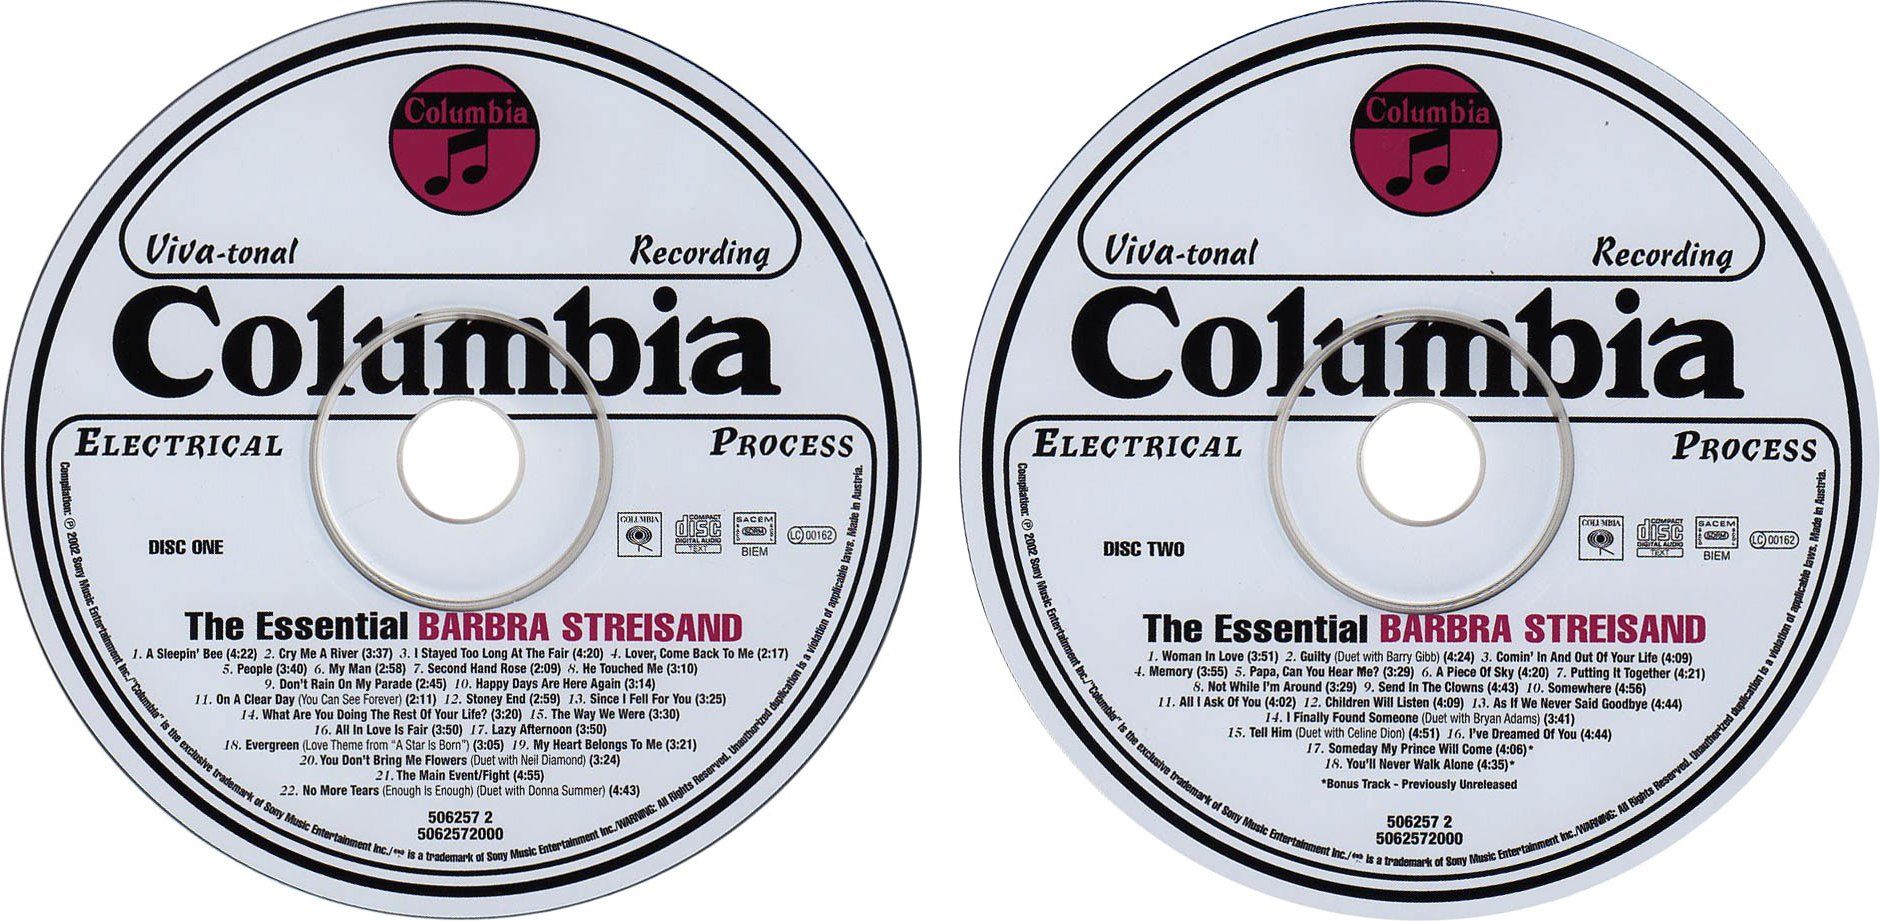 Two CDs in The Essential Barbra Streisand set